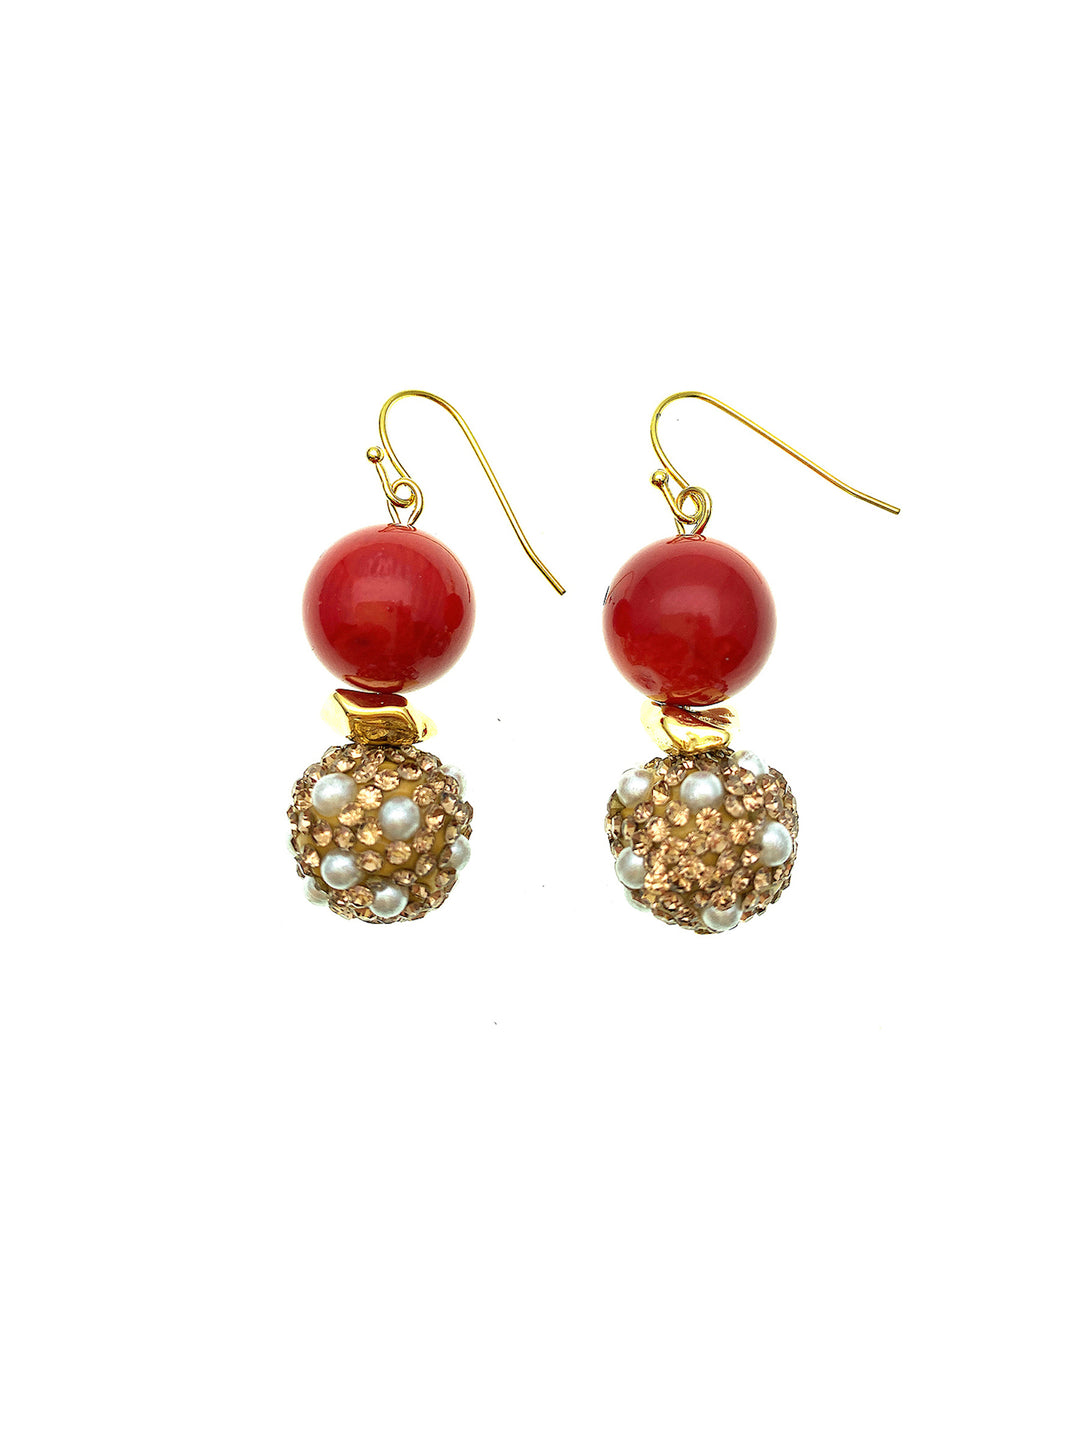 Red Coral With Rhinestones Bordered Pearls Earrings FE006 - FARRA